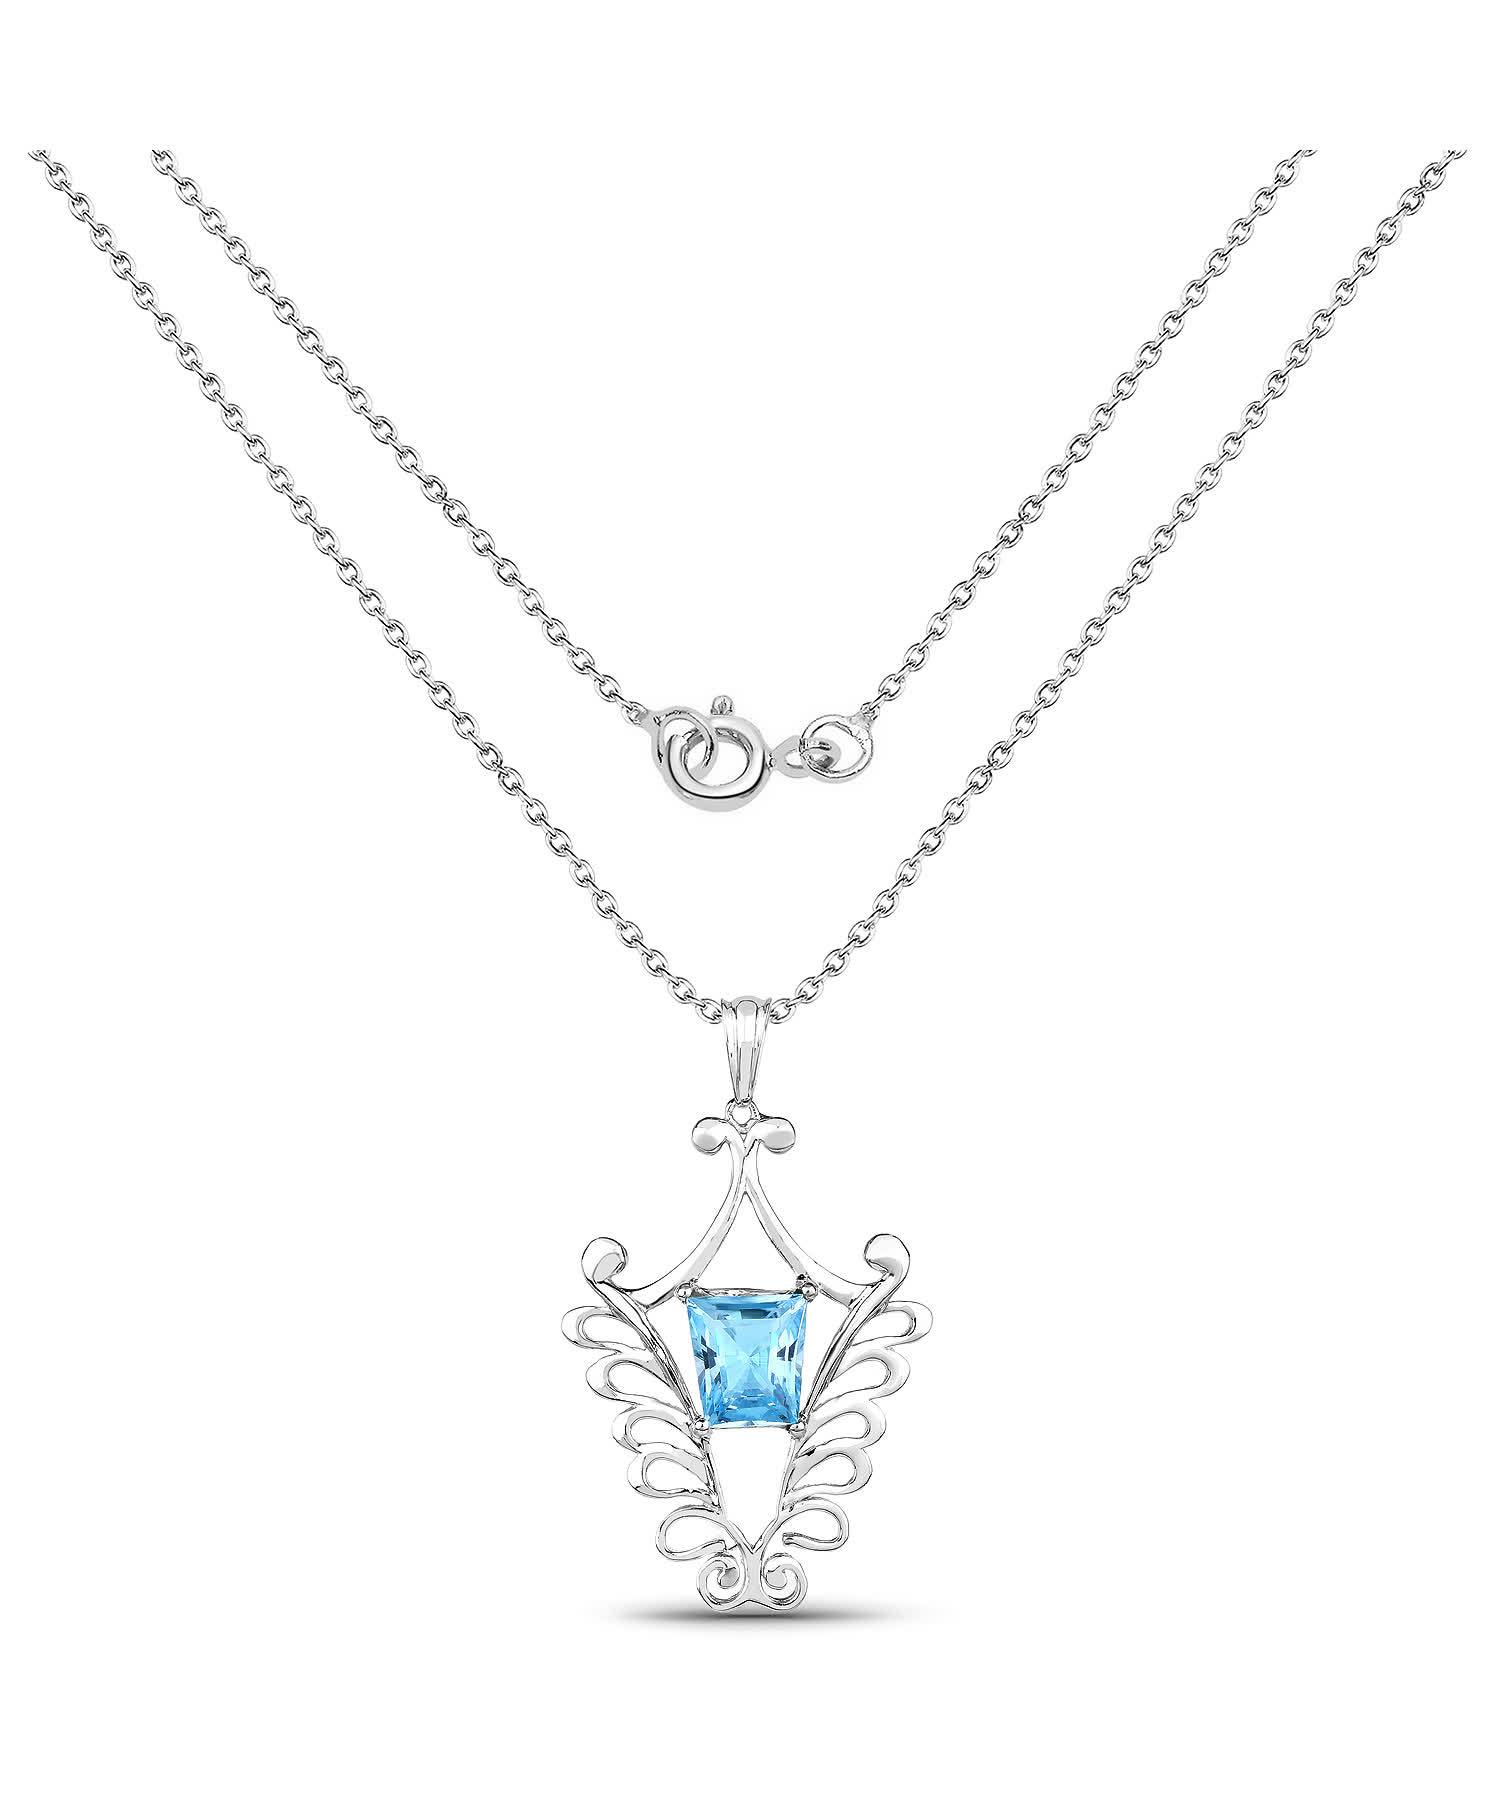 5.68ctw Natural Swiss Blue Topaz Rhodium Plated 925 Sterling Silver Pendant With Chain View 2